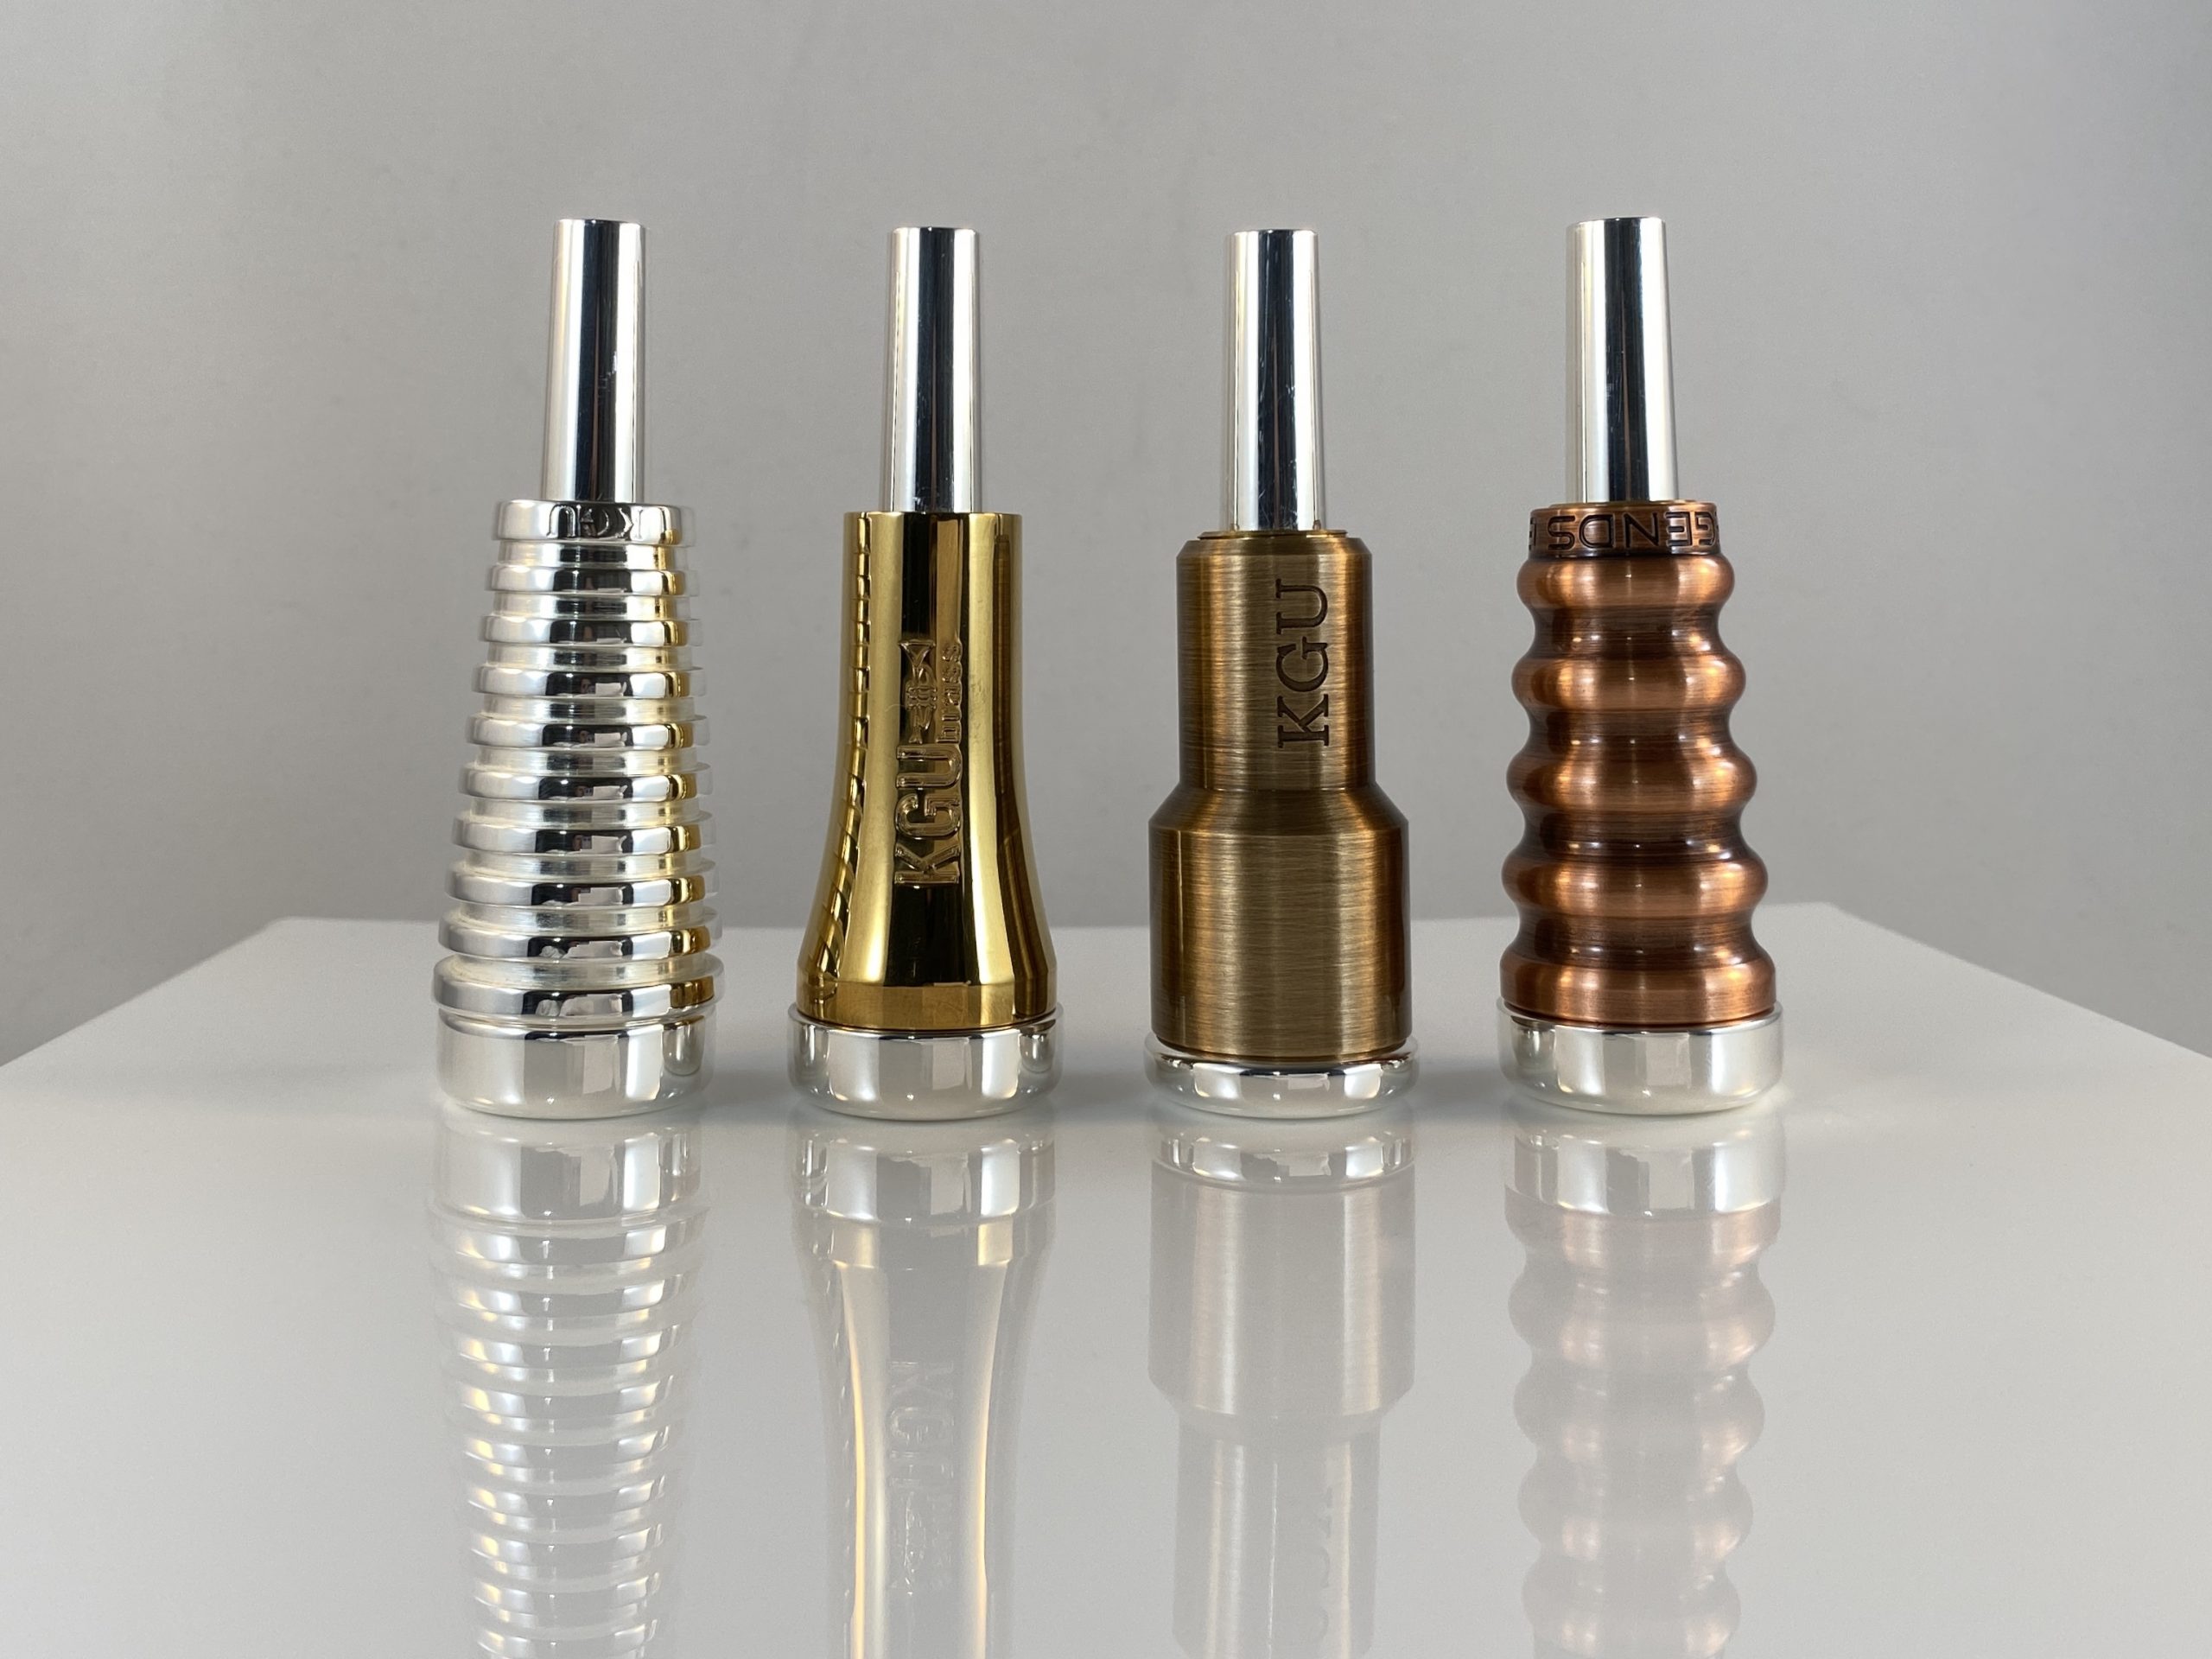 A Variety of Mouthpiece Boosters